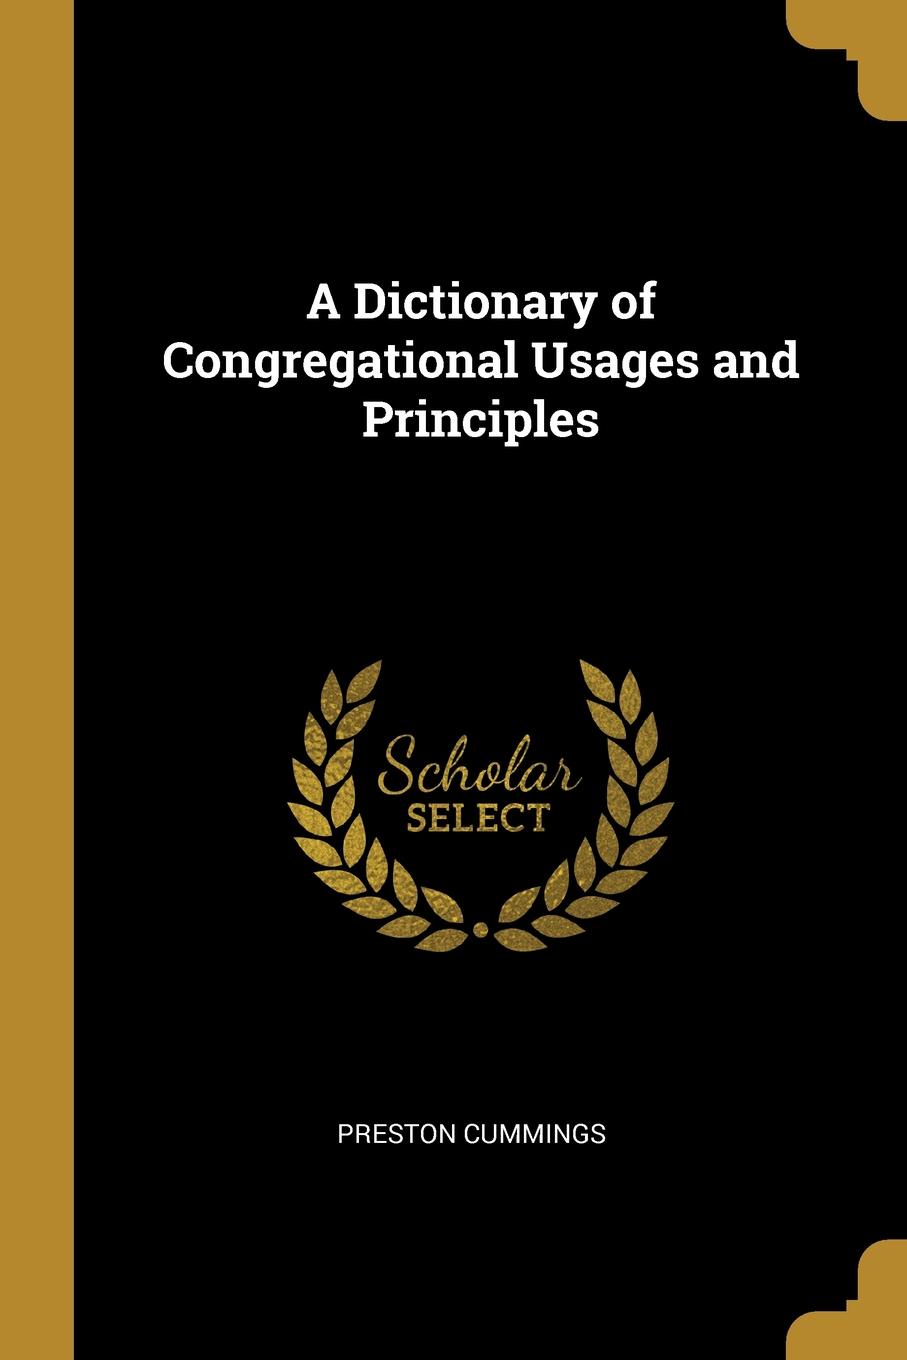 A Dictionary of Congregational Usages and Principles